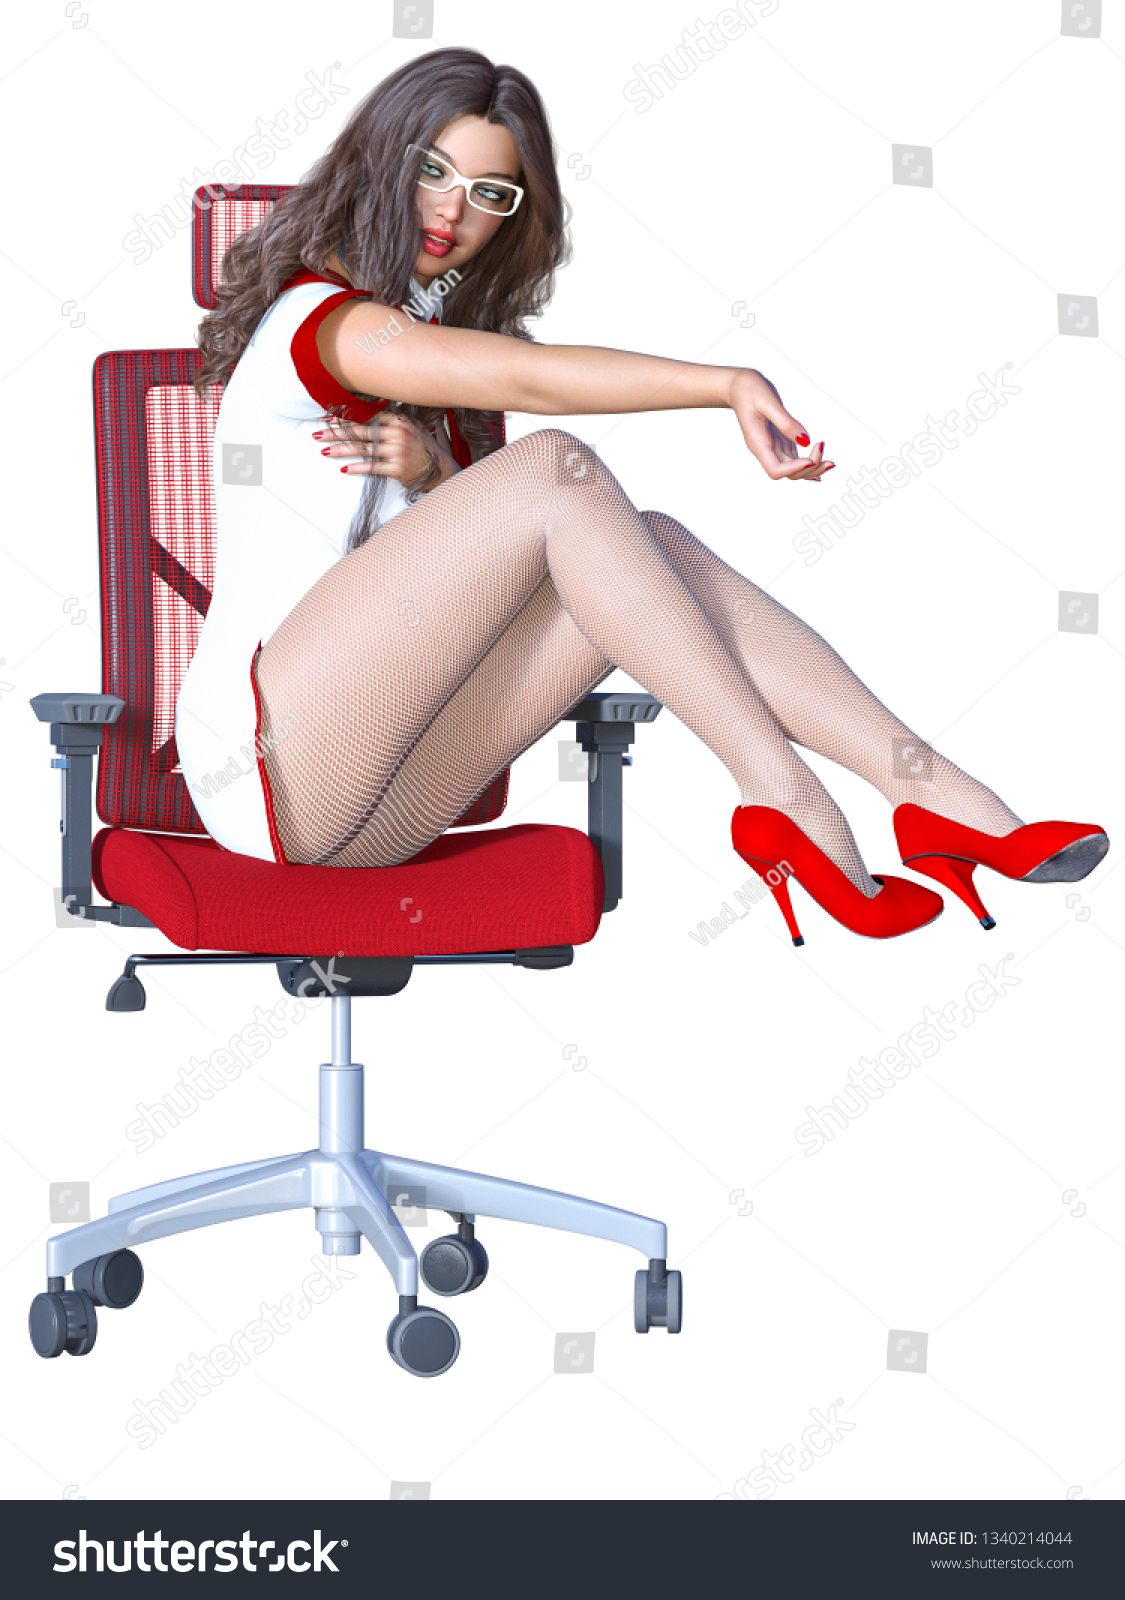 Hot Girl On Office Chair